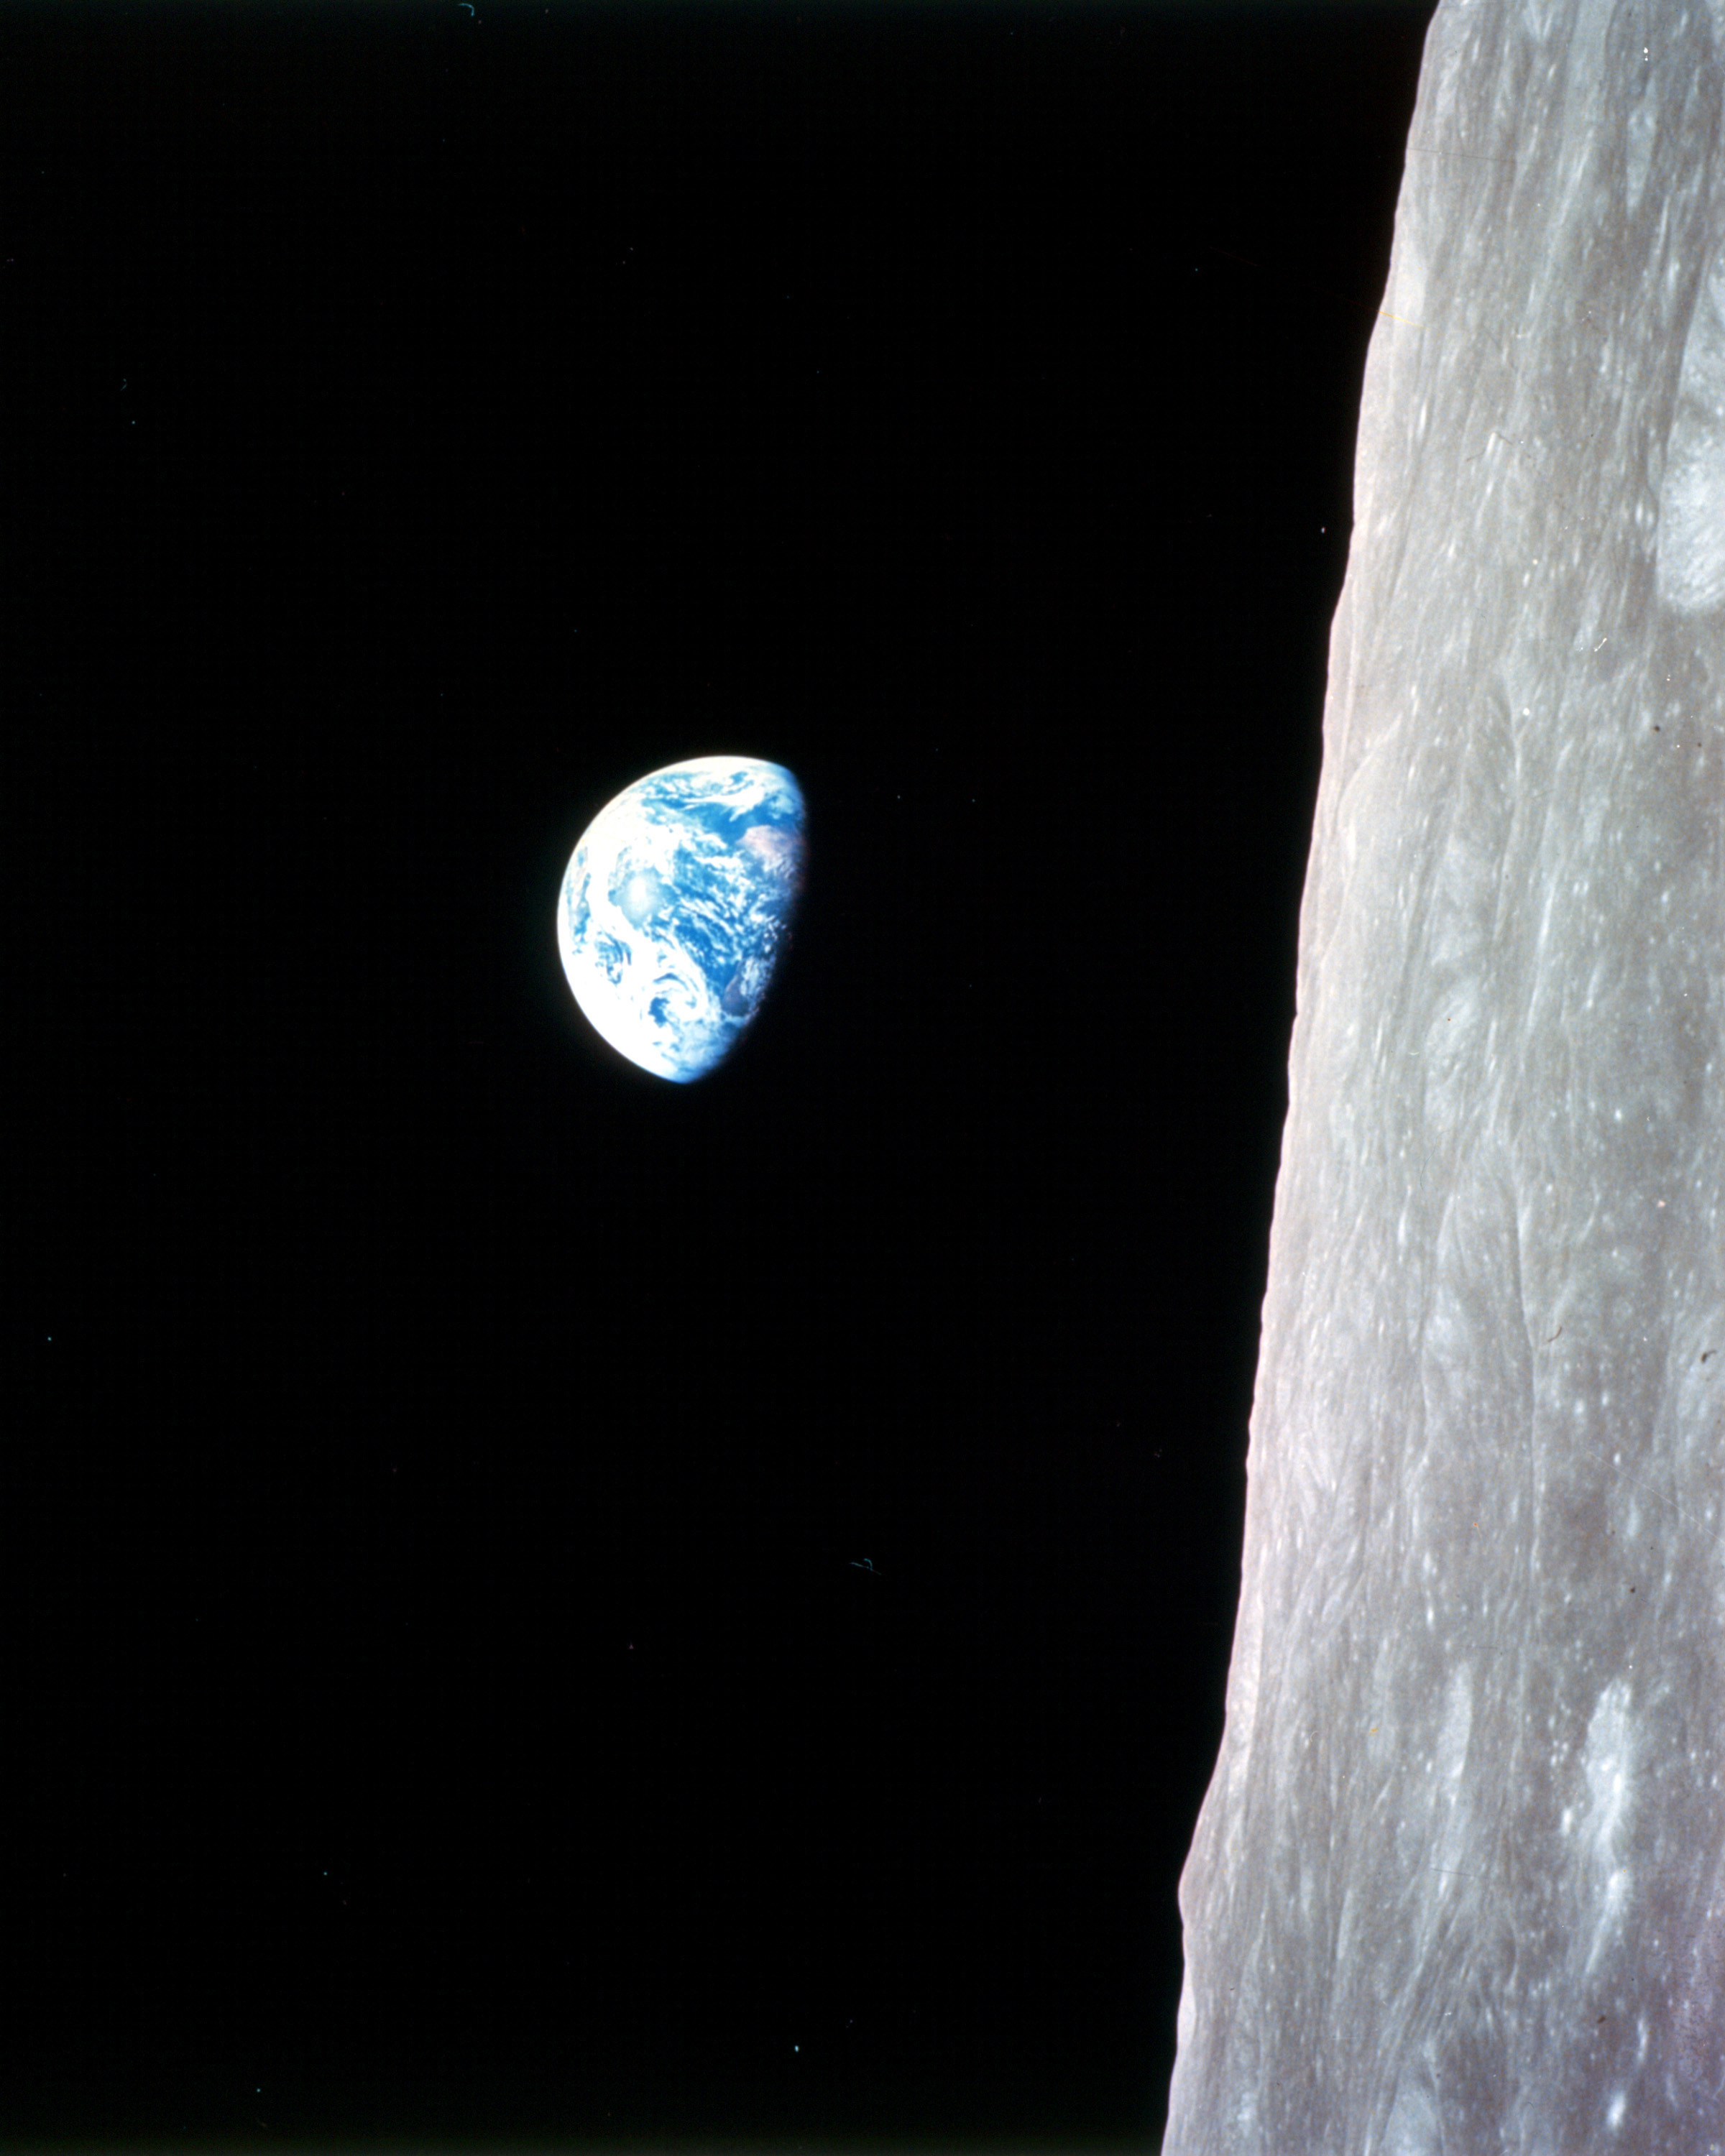 Anders took the infamous photo "Earthrise" while exploring the far side of side of the moon